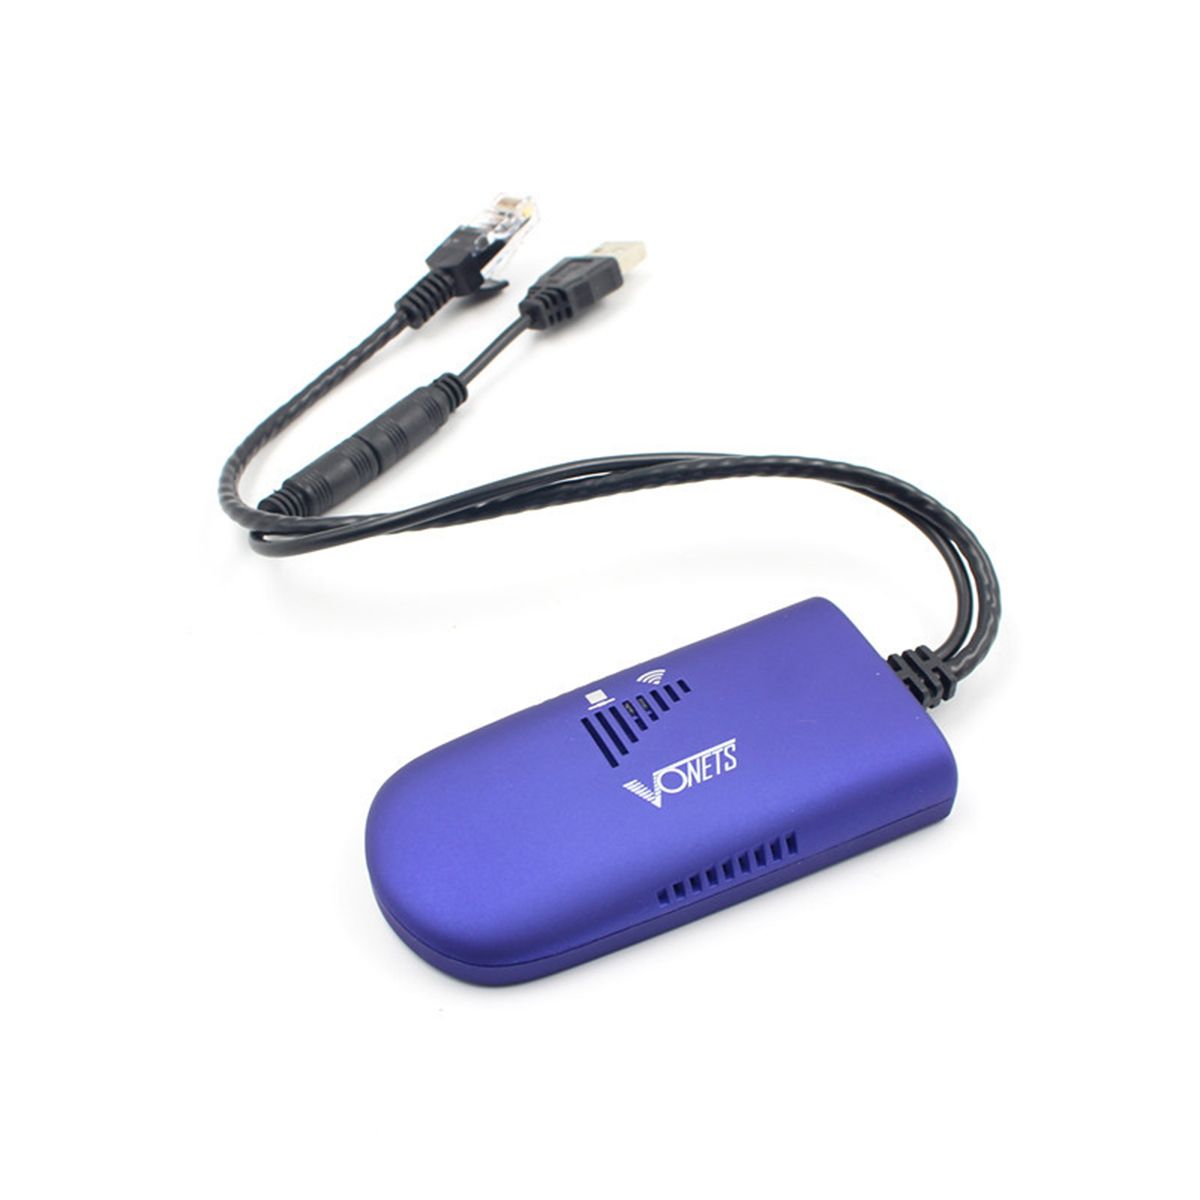 VONETS-300Mbps-USB20-Wireless-Repeater-WiFi-Bridge-Extender-Amplifier-WiFi-Booster-AP-Expand-WiFi-VA-1731809